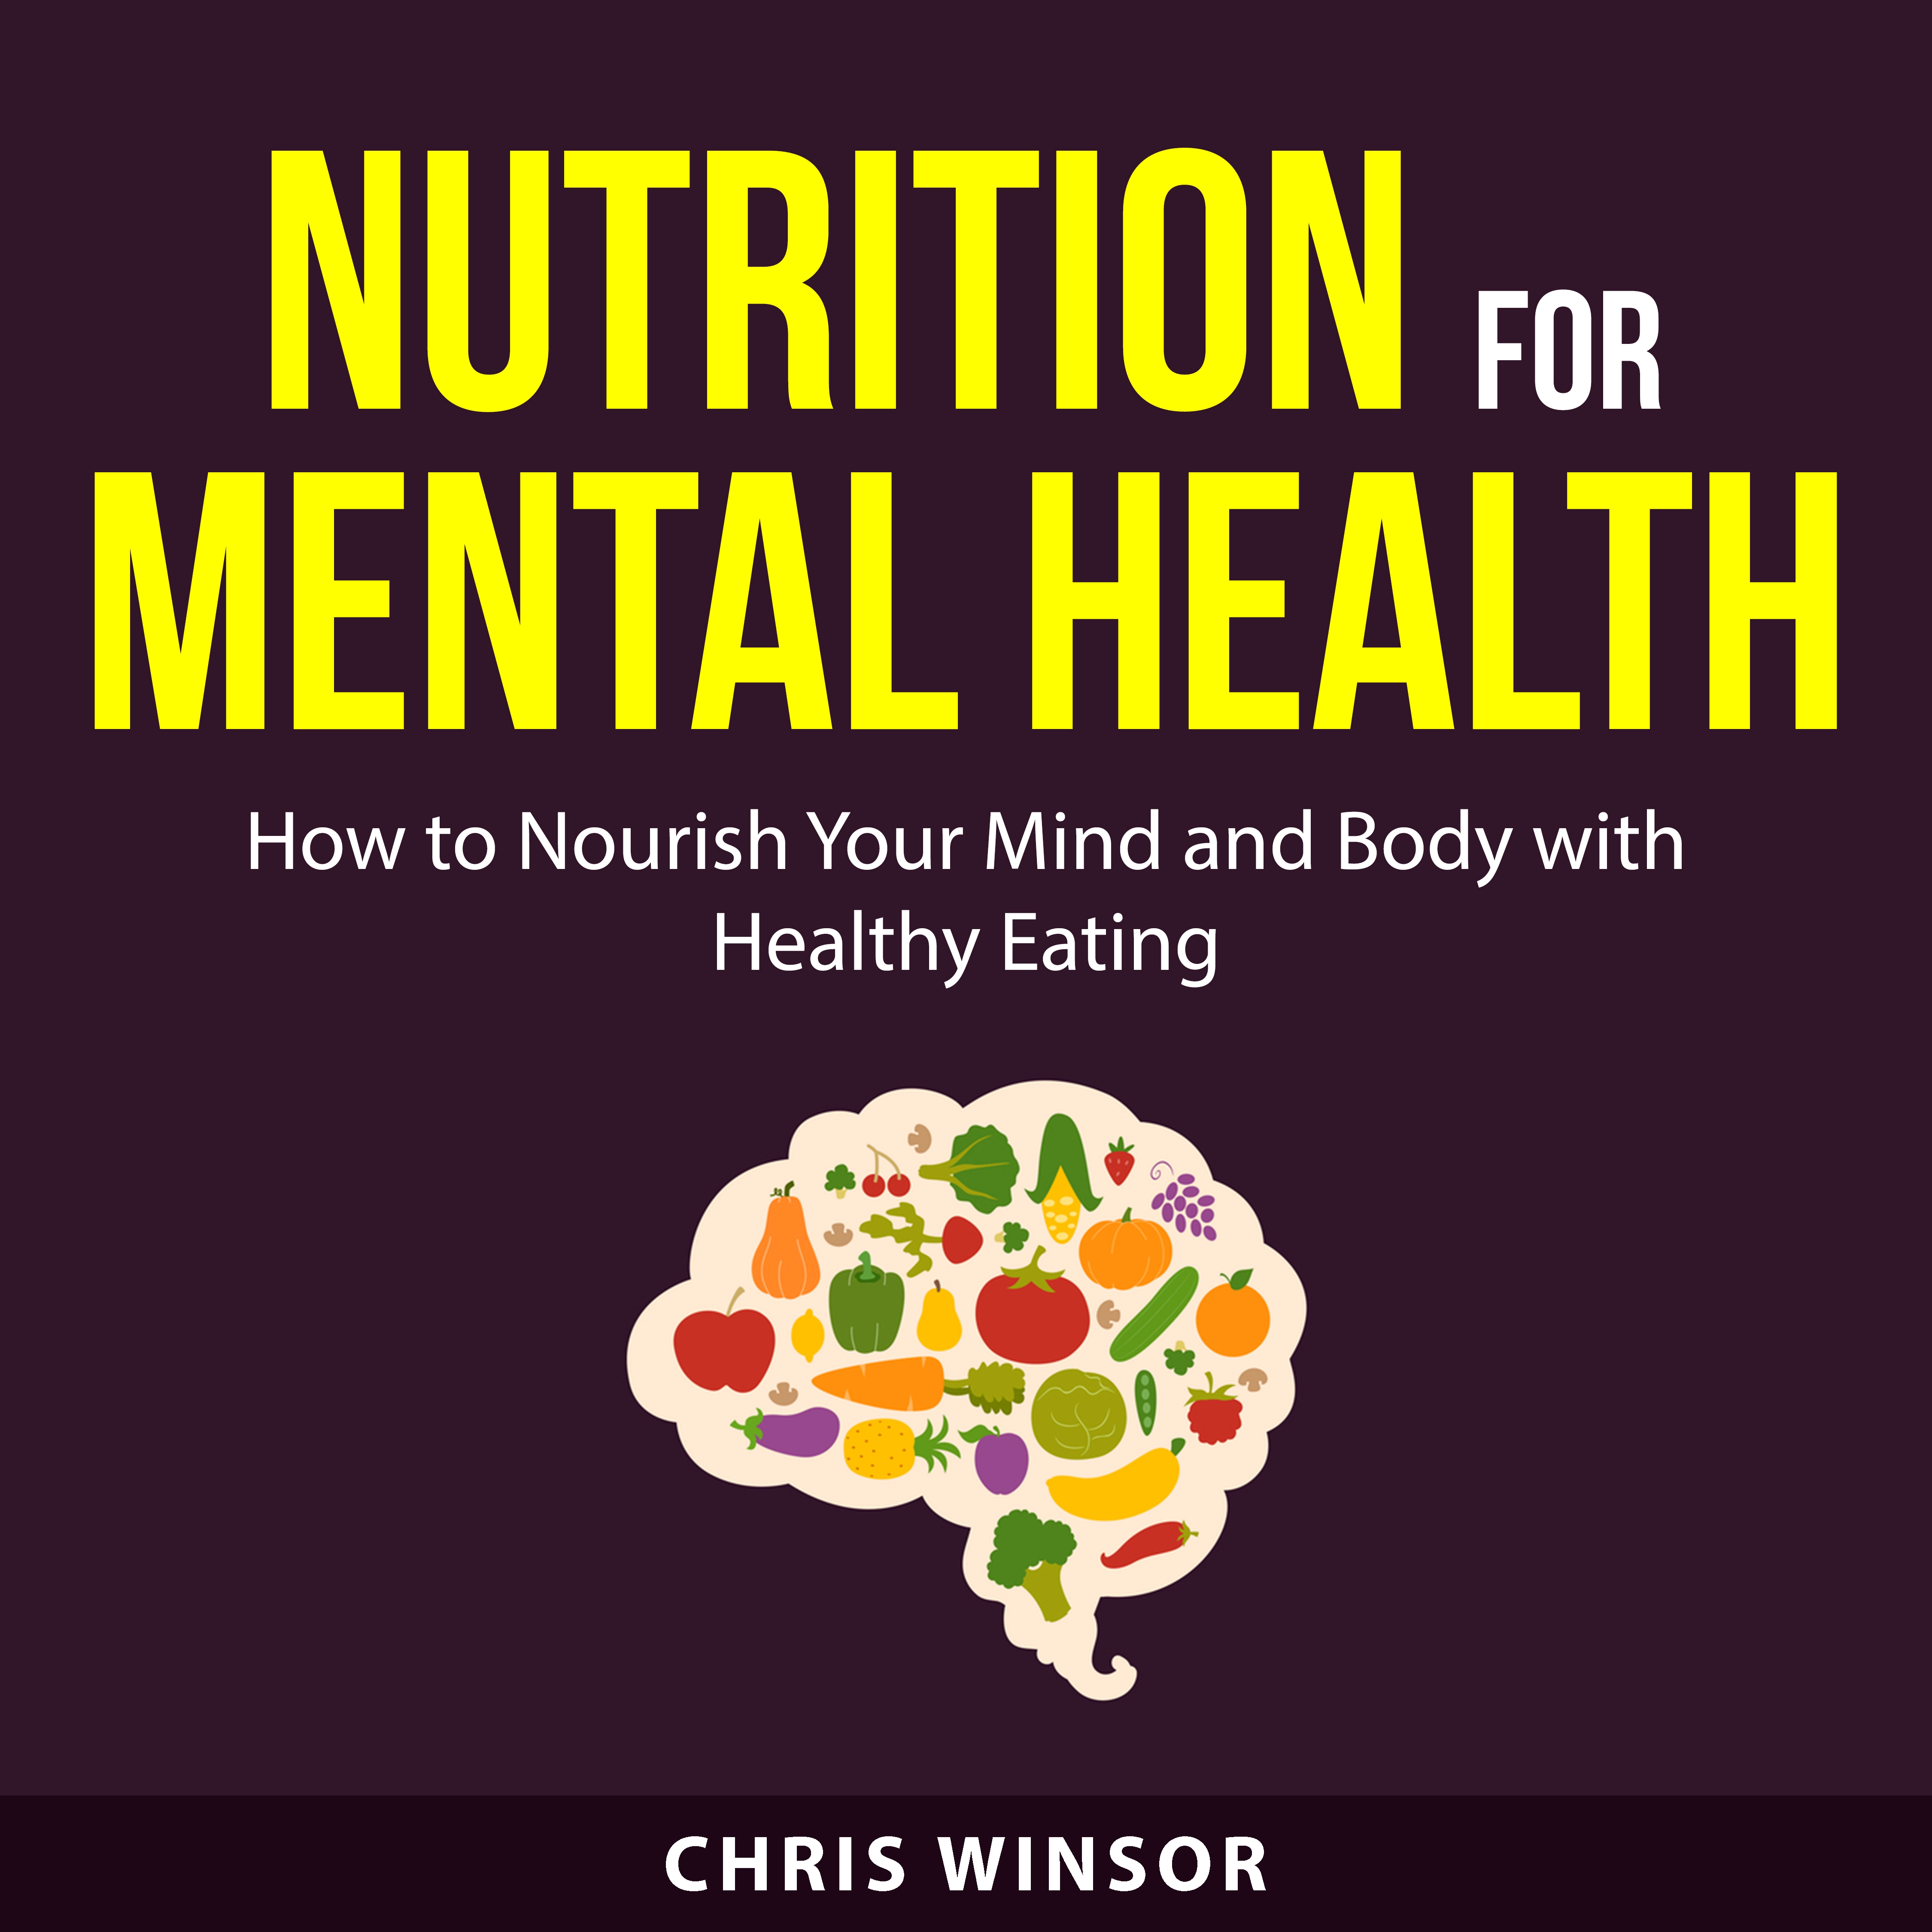 Nutrition for Mental Health Audiobook by Chris Winsor